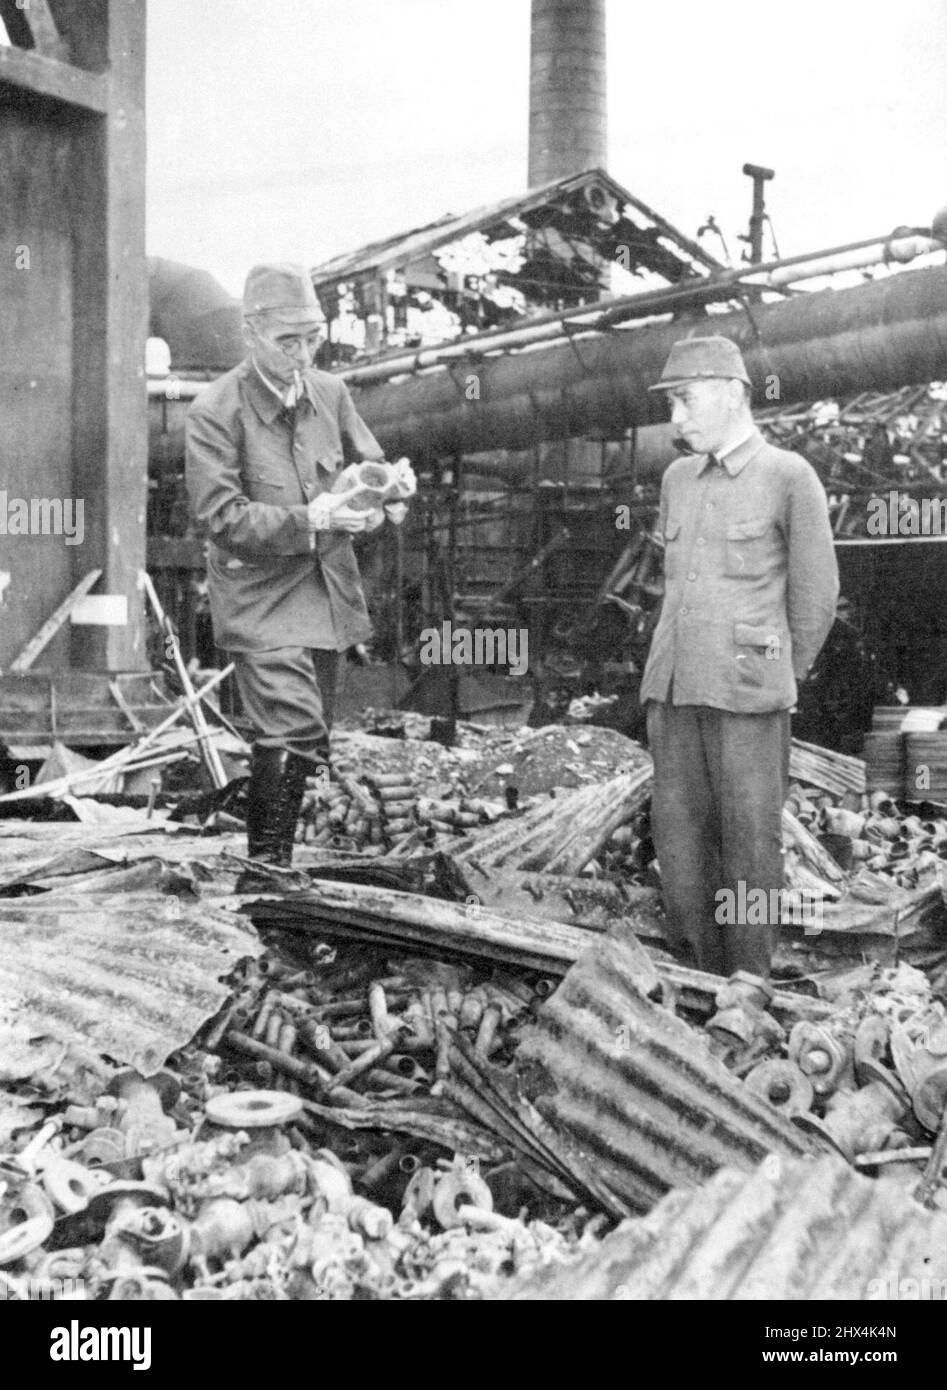 Jap Tycoon Examines Wrecked Factory -- Ryozo Asano, (left), spokesman for the Zaibatsu, the small group of men who own and direct virtually all of Japan's industry, wears a uniform as he examines the wreckage of his Tokyo steel plant which was blasted by Doolittle's raiders, April 18, 1942. Man in uniform on the right is unidentified. October 23, 1945. (Photo by Associated Press Photo). Stock Photo